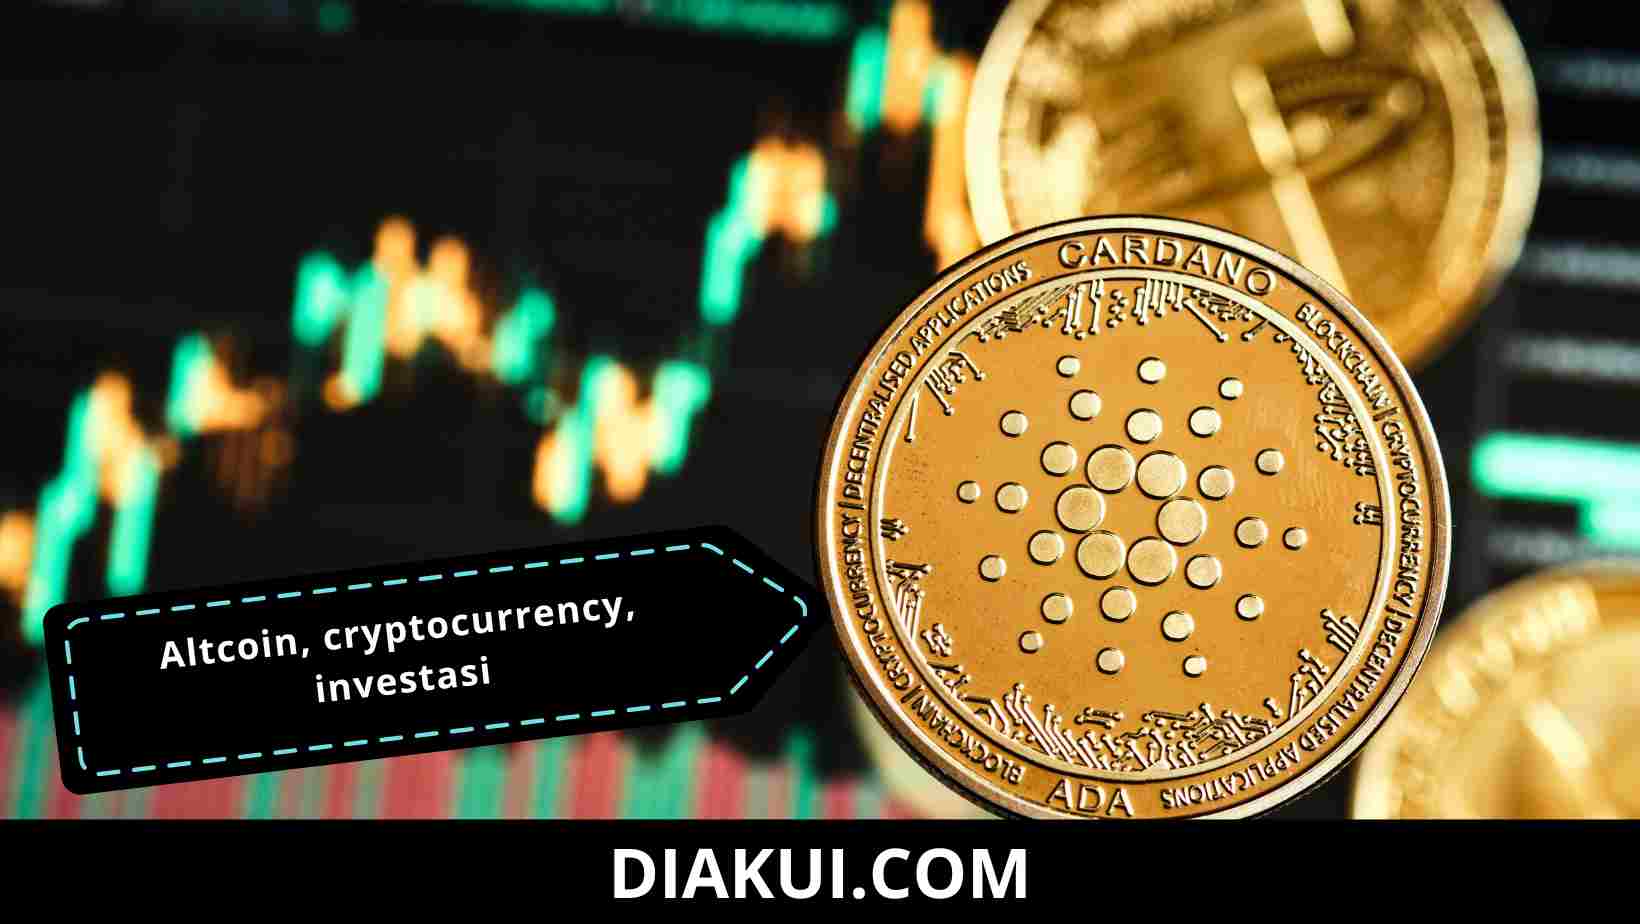 Altcoin, cryptocurrency, investasi